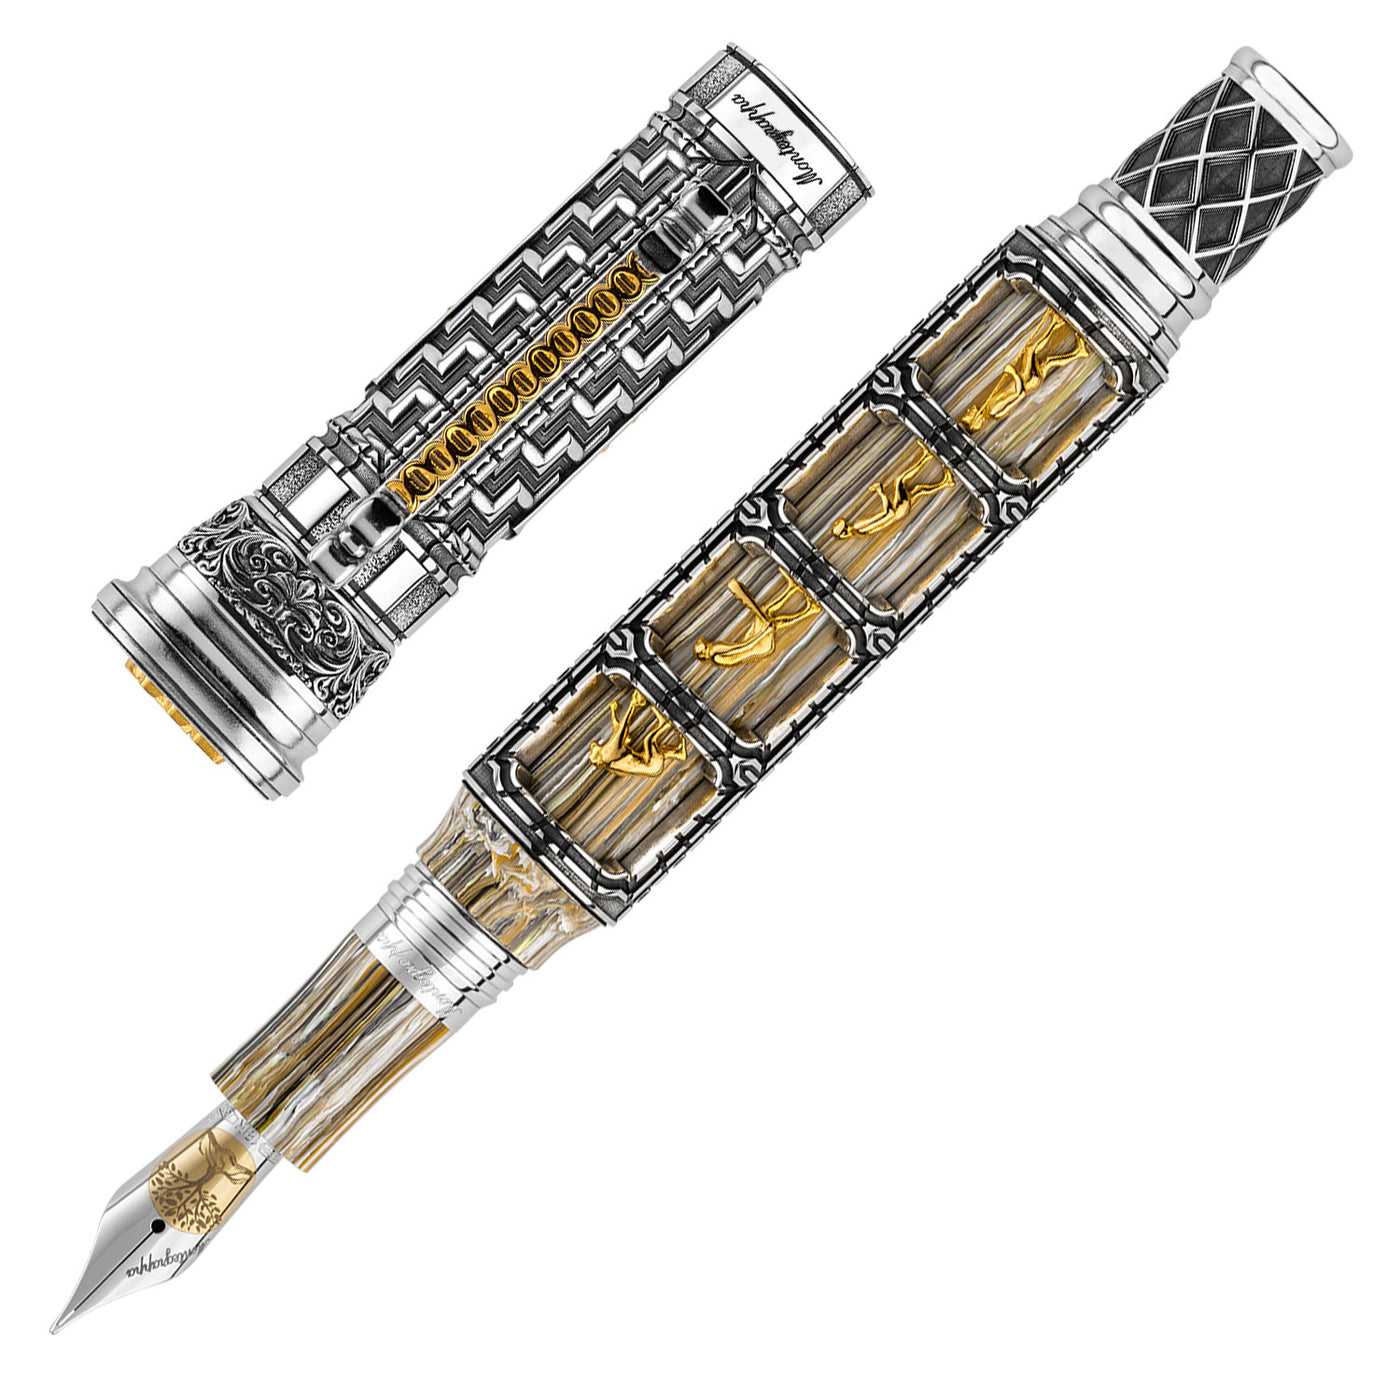 Montegrappa Theory of Evolution Fountain Pen - Avanguardia (Limited Edition) 1